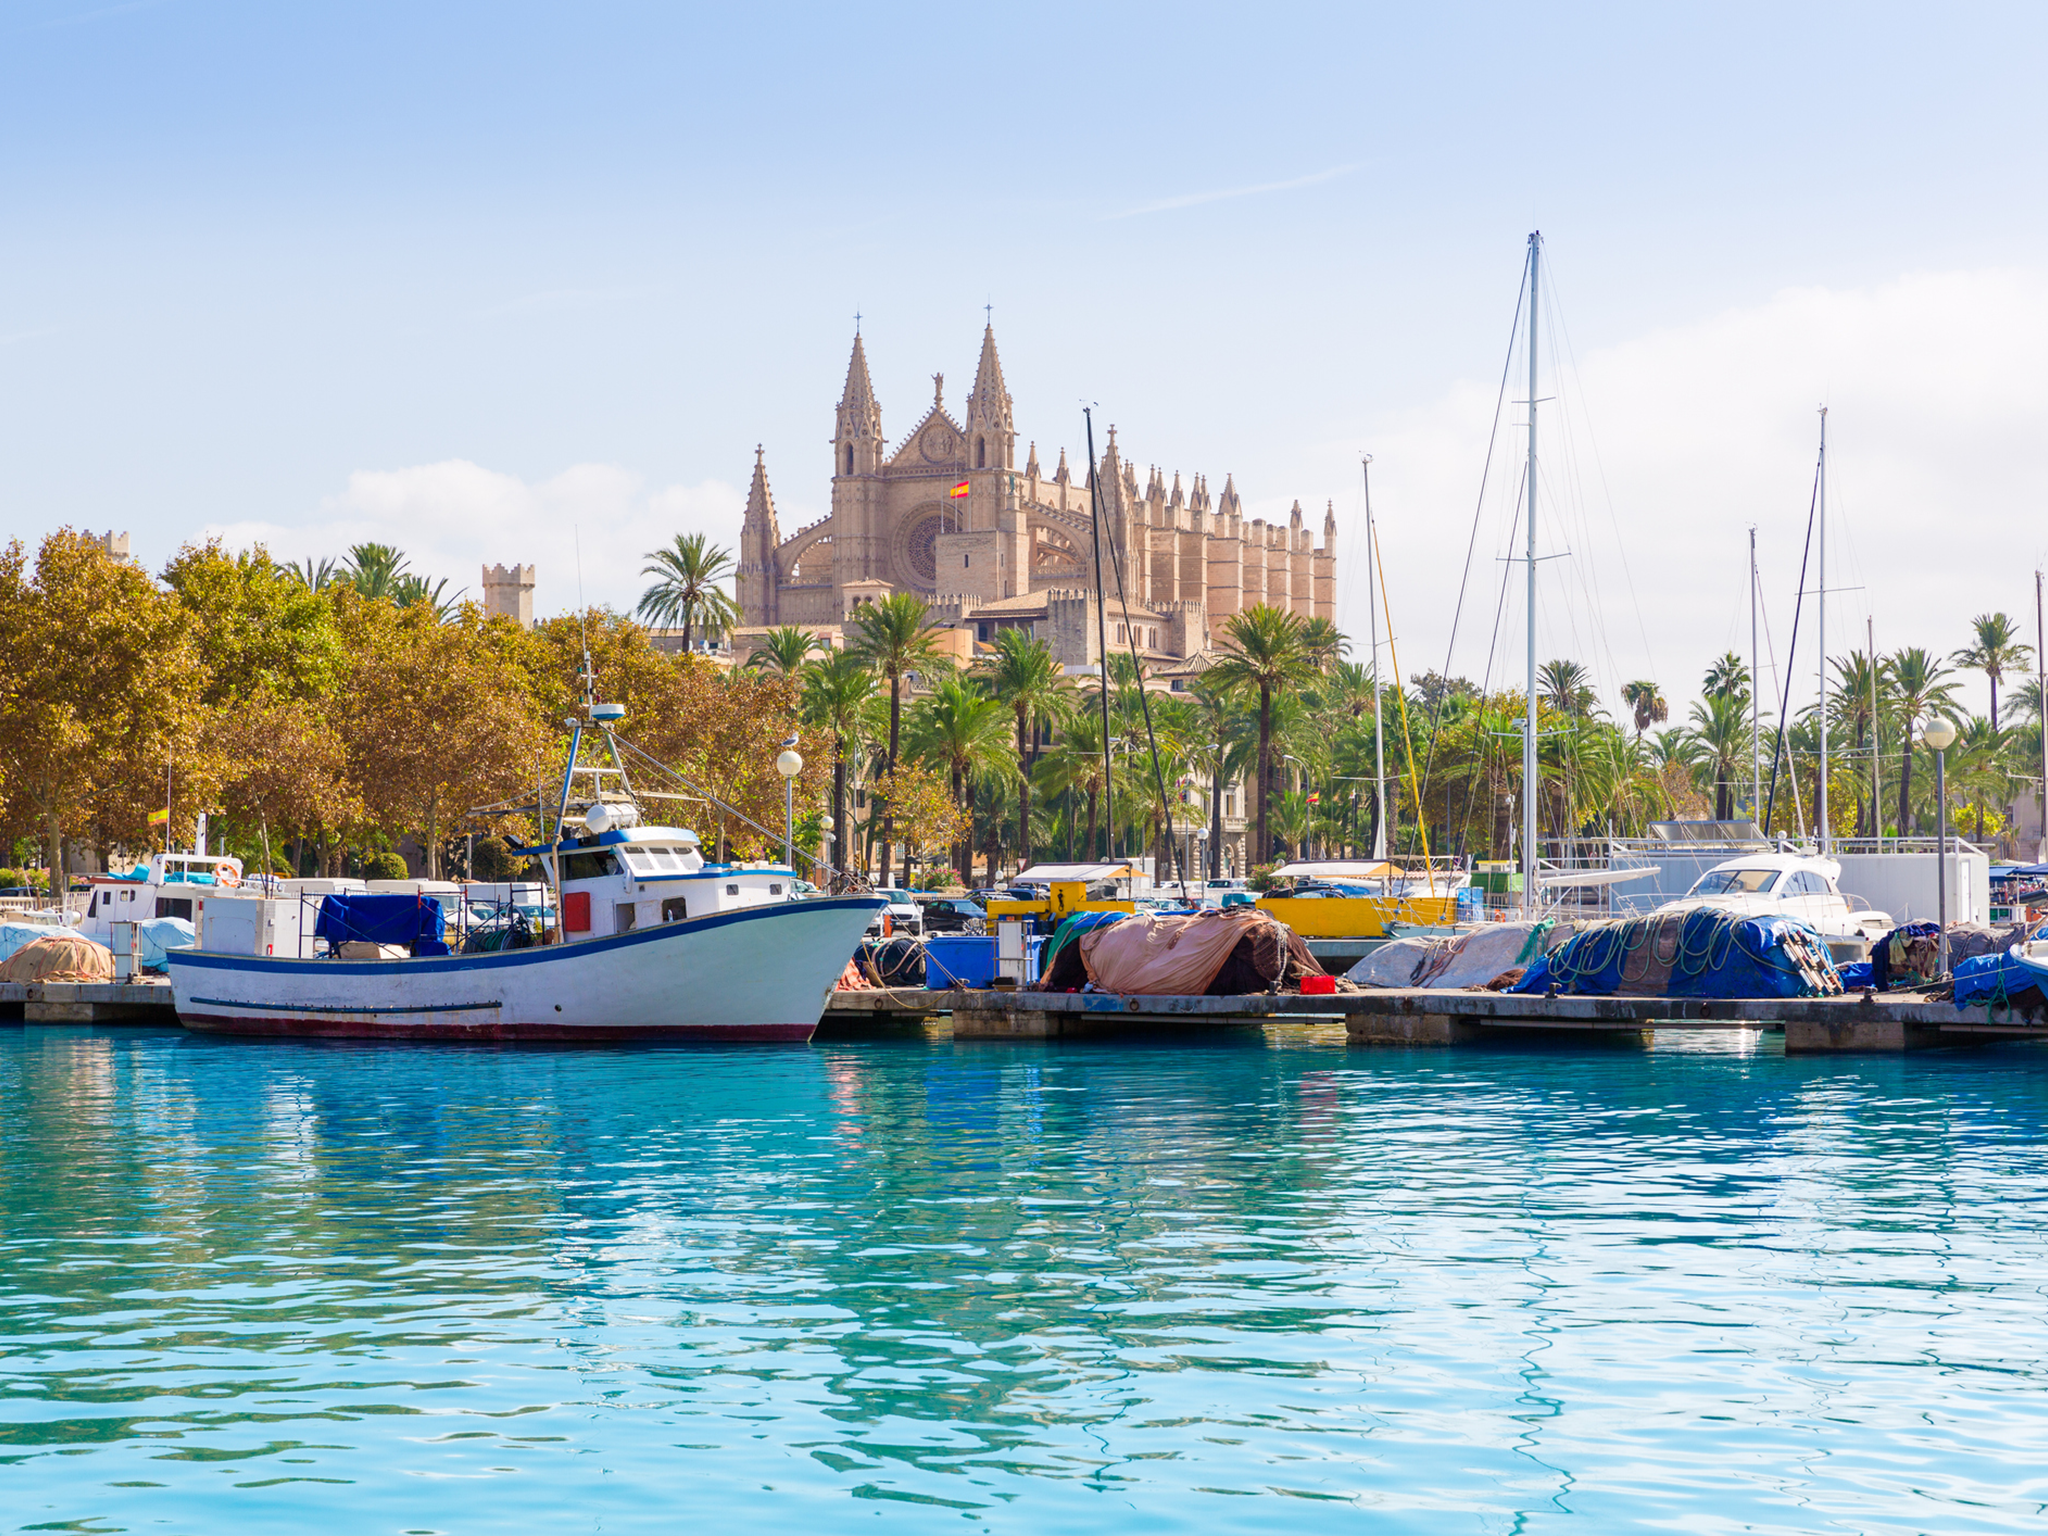 The city’s blend of Moorish, medieval and Gothic architecture make it a real stunner